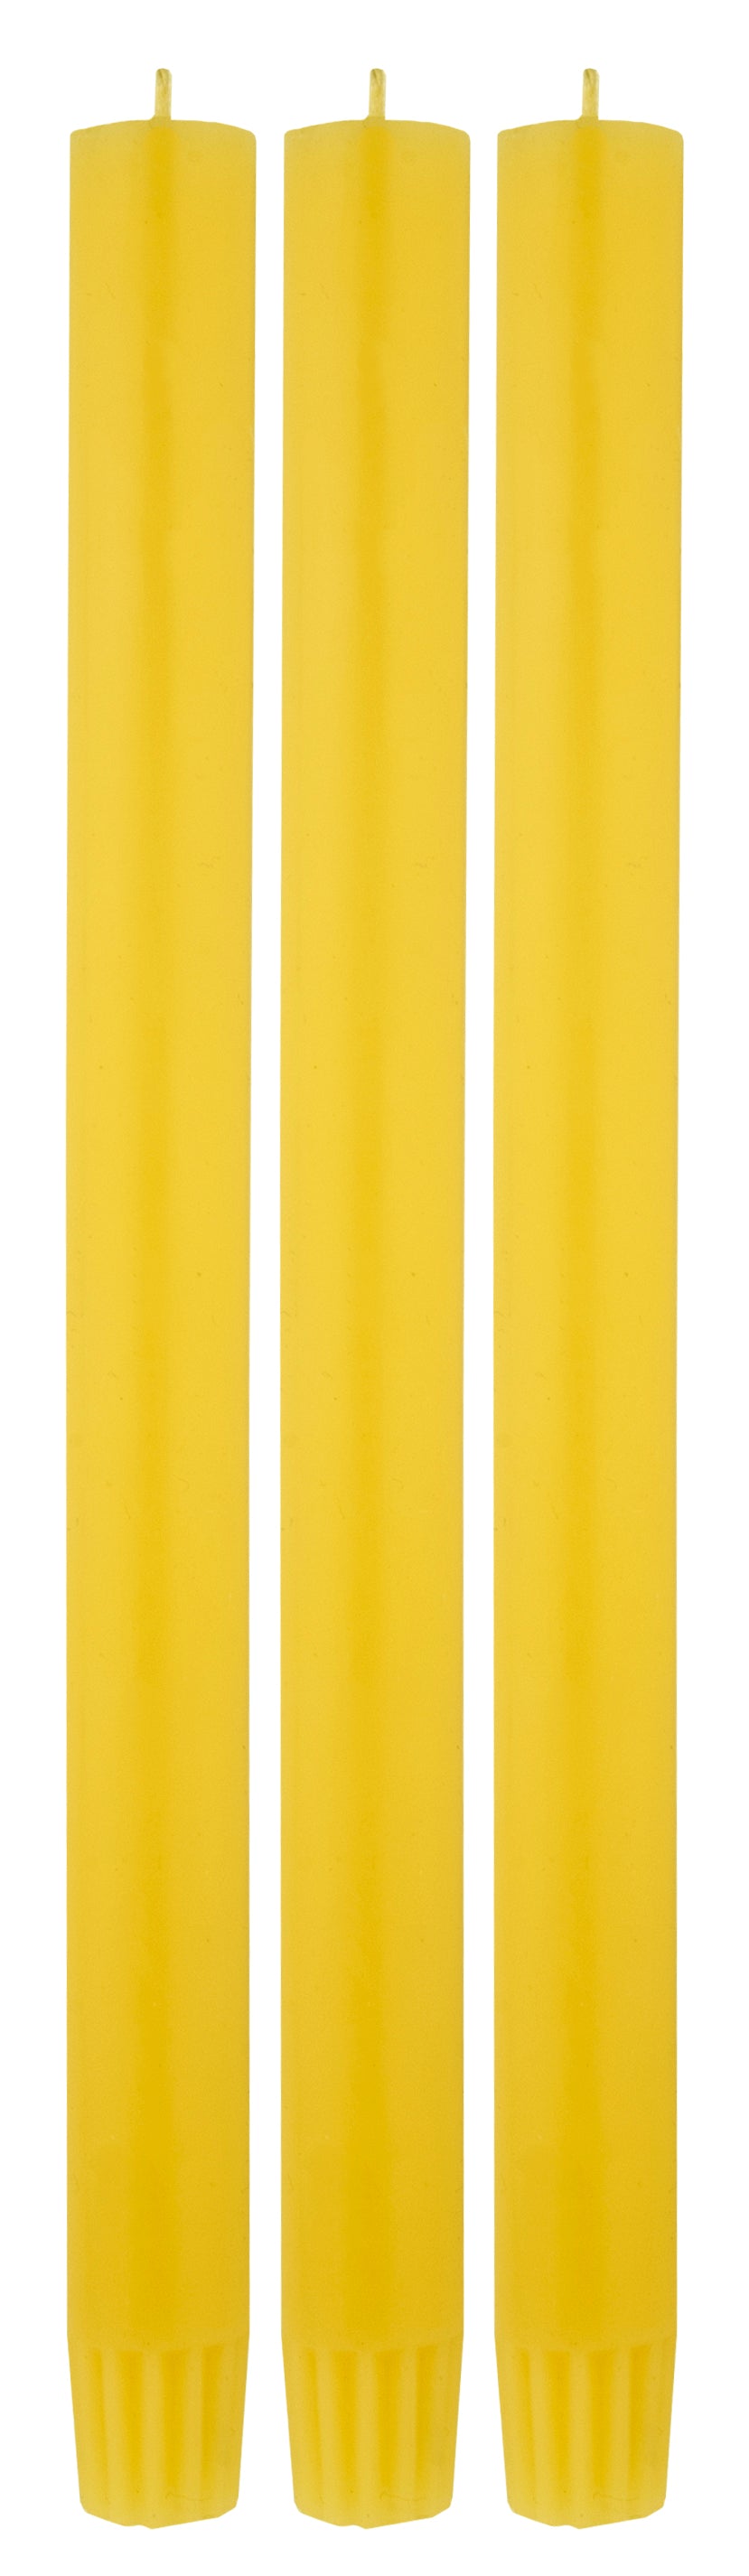 Yellow Dinner Candle - pack of 12